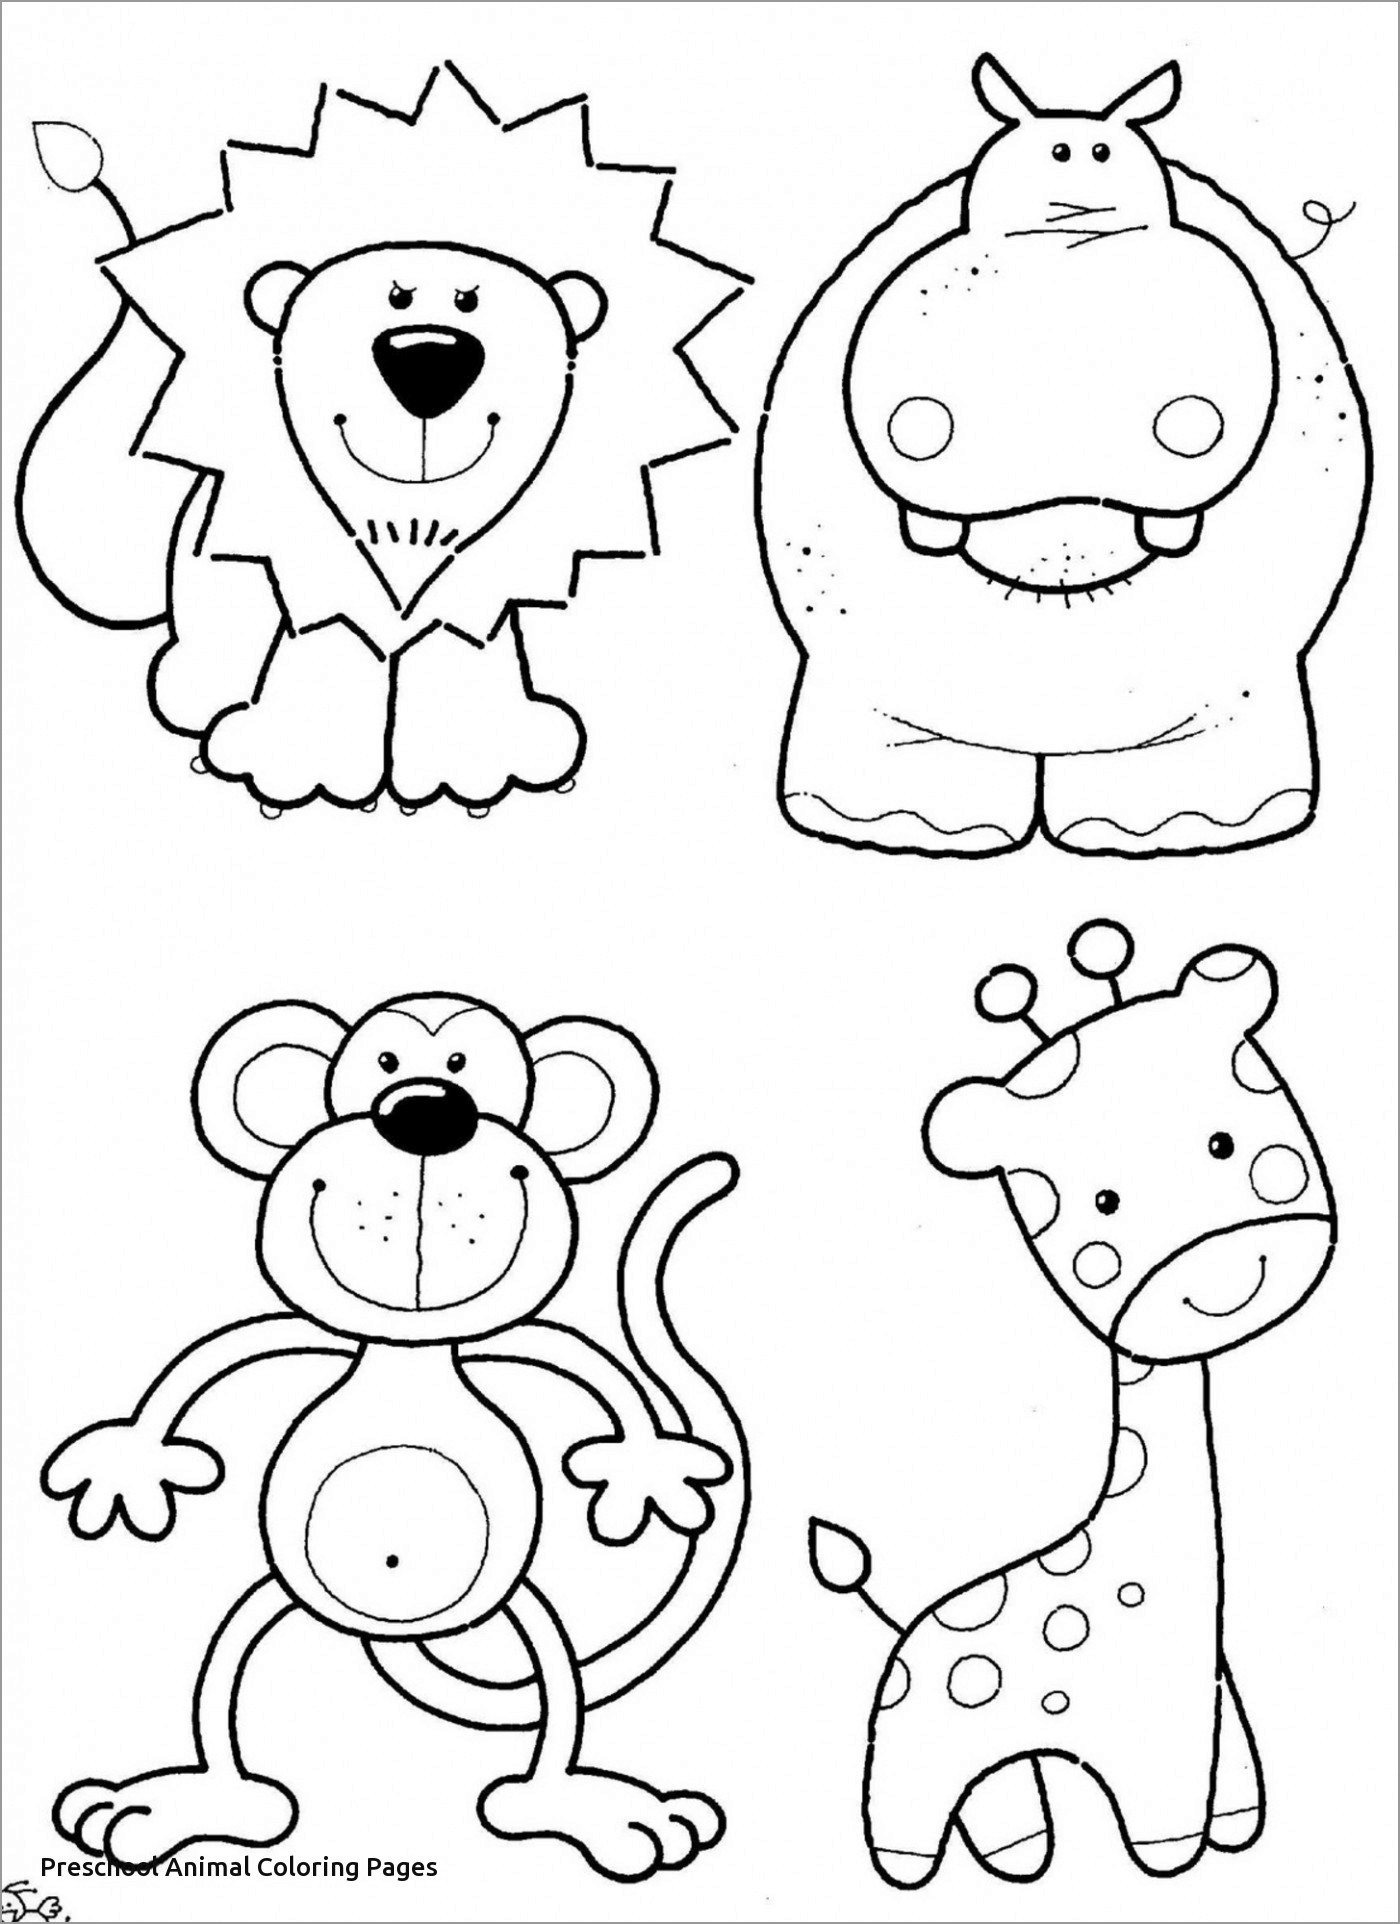 Grassland African Animals Coloring Pages   ColoringBay